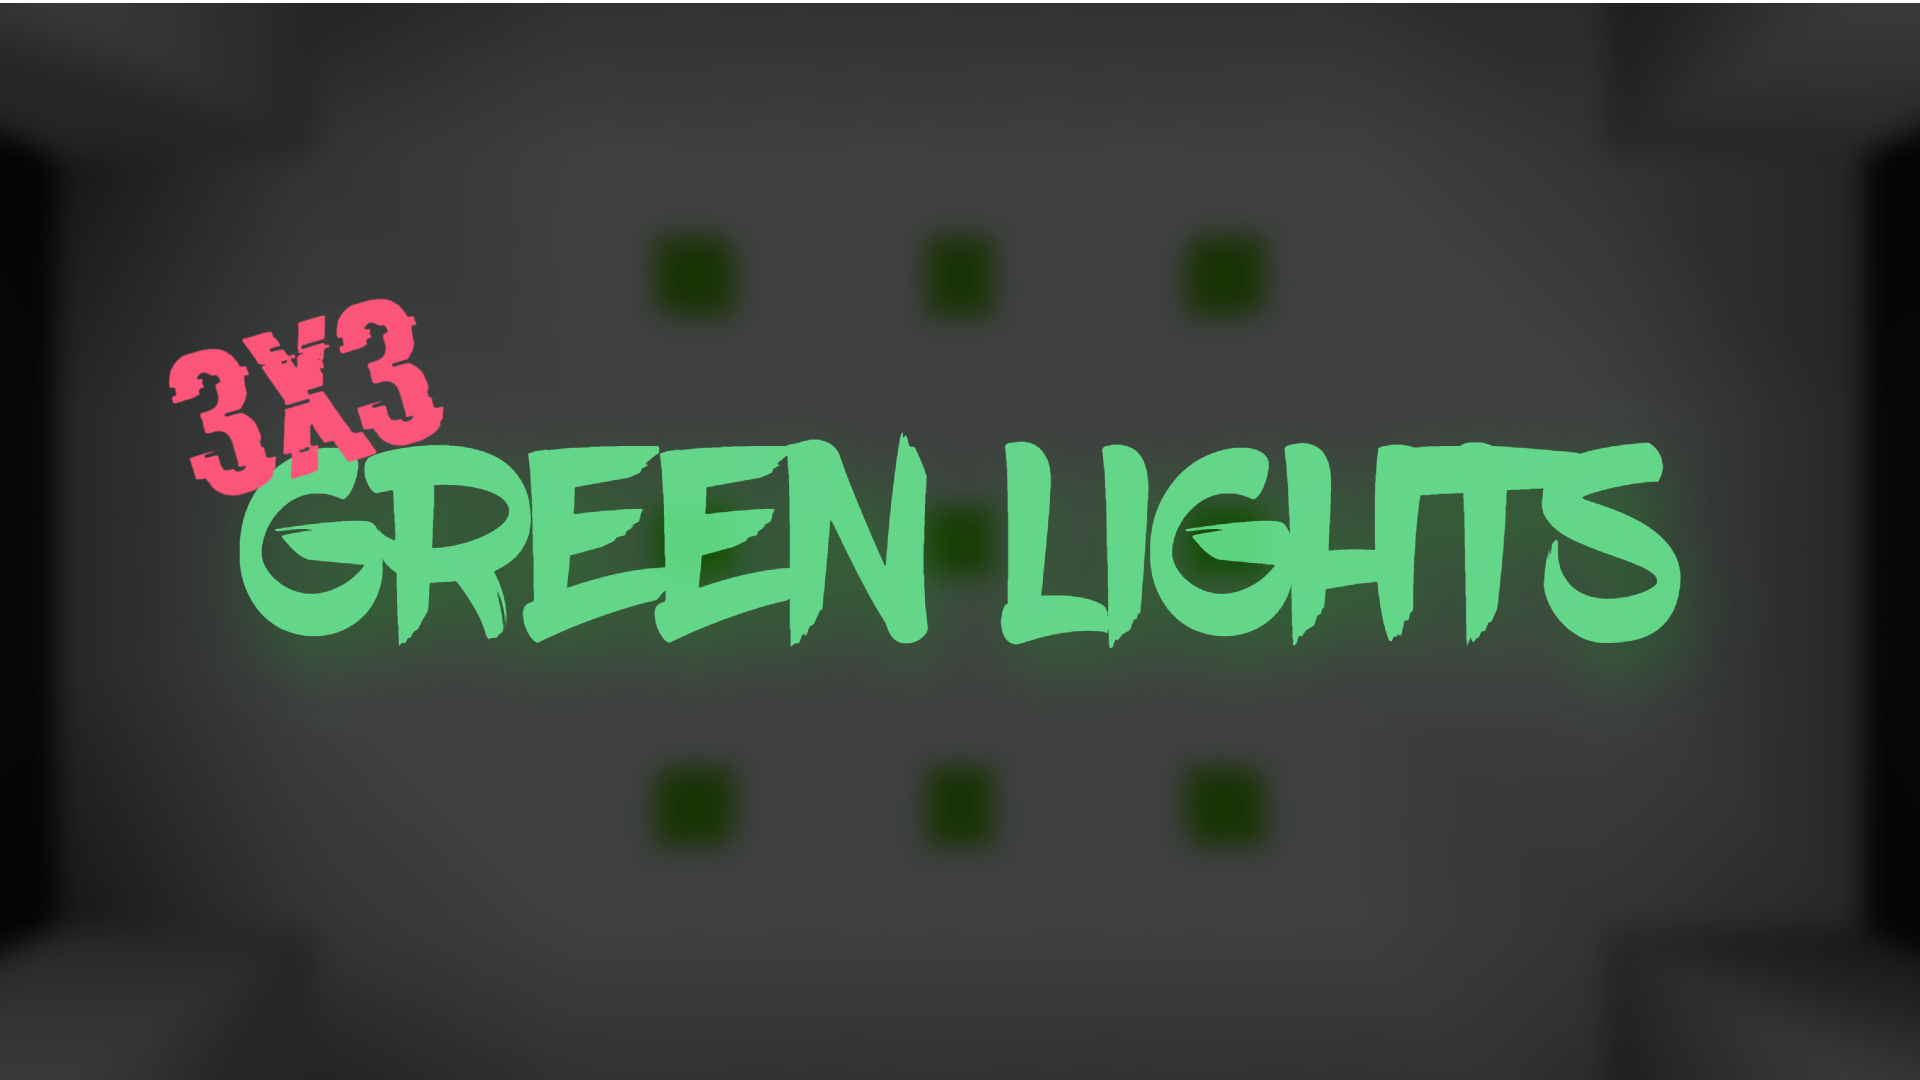 Download Green Lights 3x3 for Minecraft 1.16.5